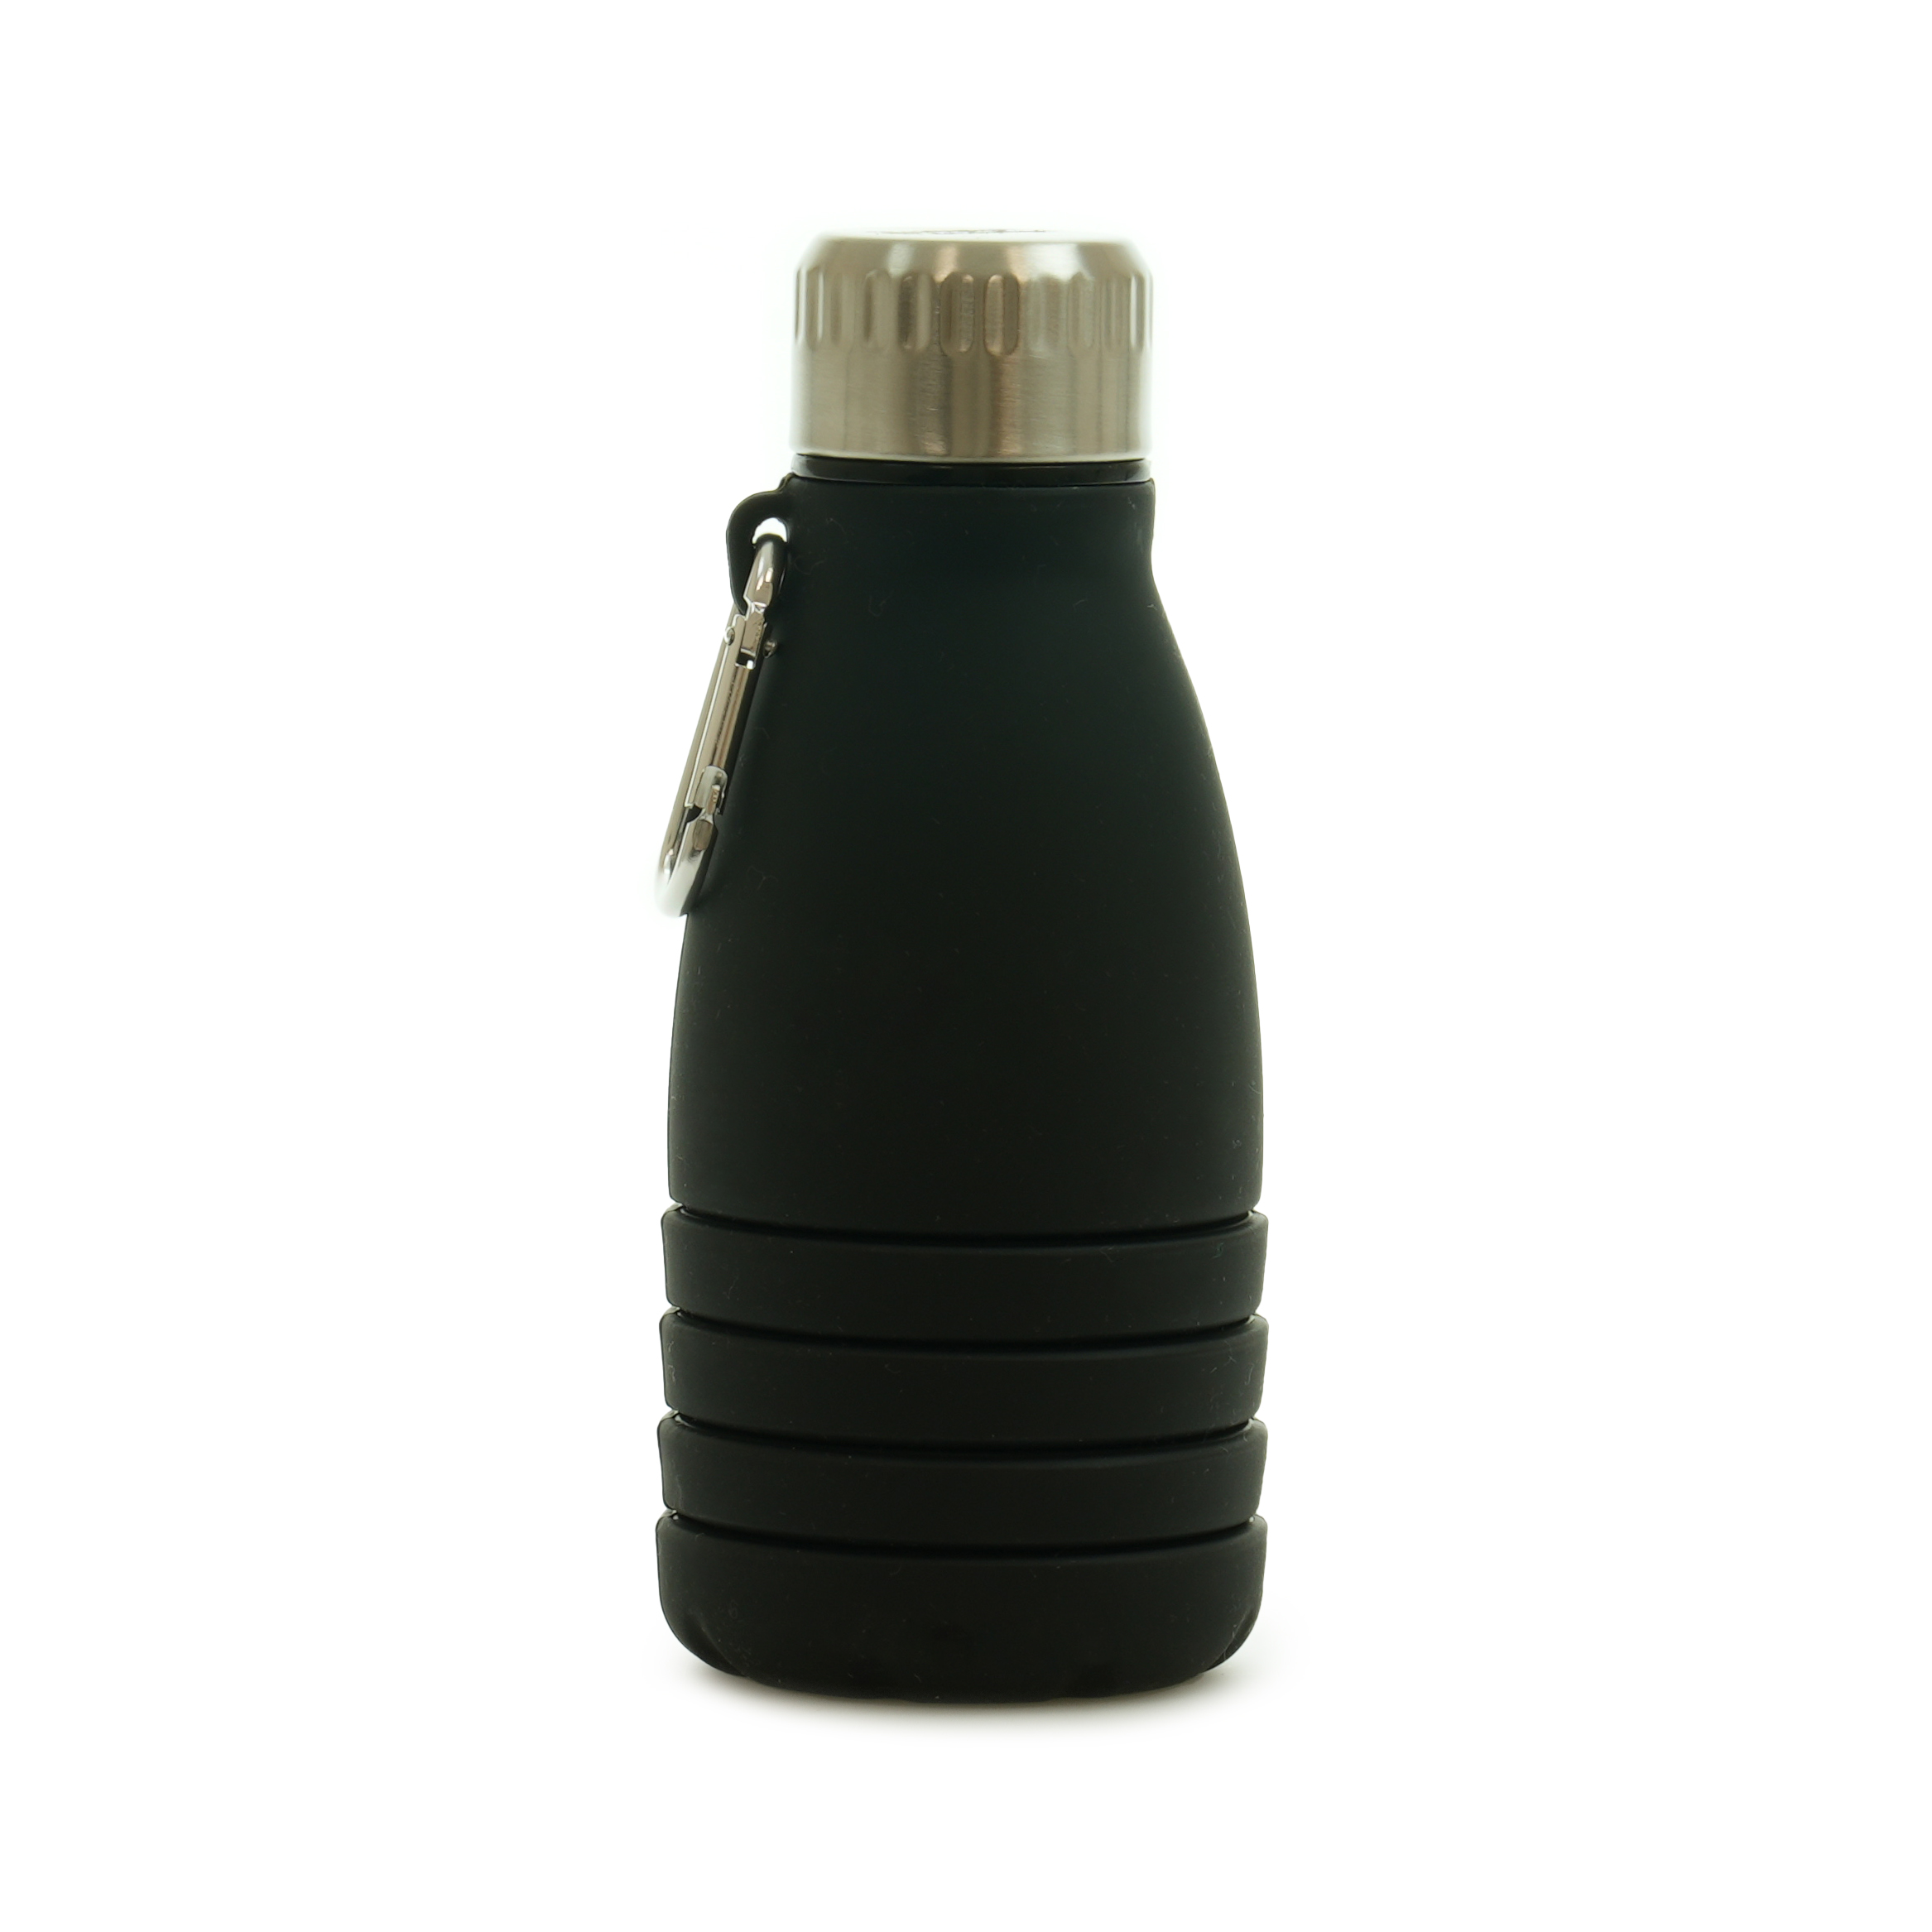 MG0118BK - BODMIN 550ml COLLAPSIBLE SILICONE DRINKS BOTTLE WITH CARABINER